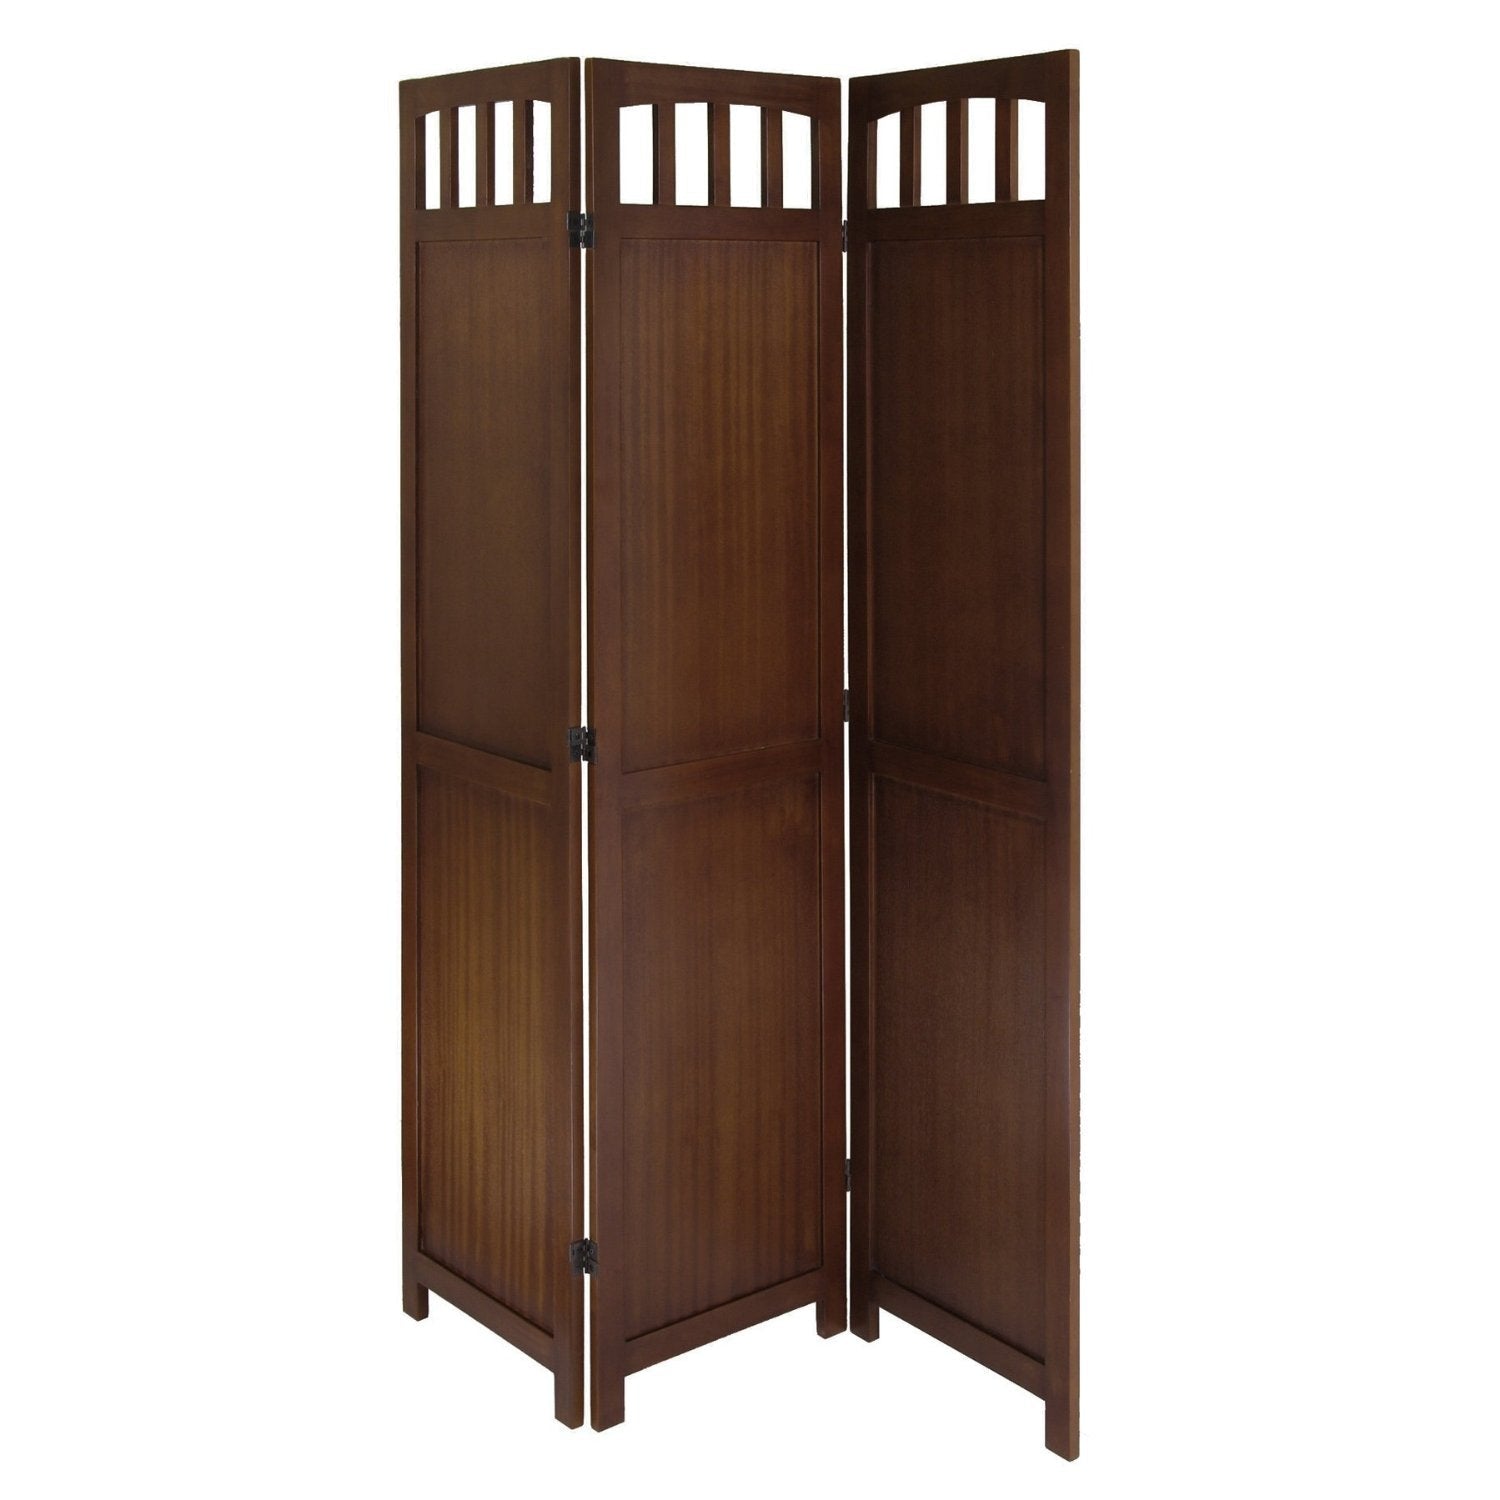 Accents > Room Divider Screens - 3-Panel Wooden Folding Room Divider Screen In Walnut Finish